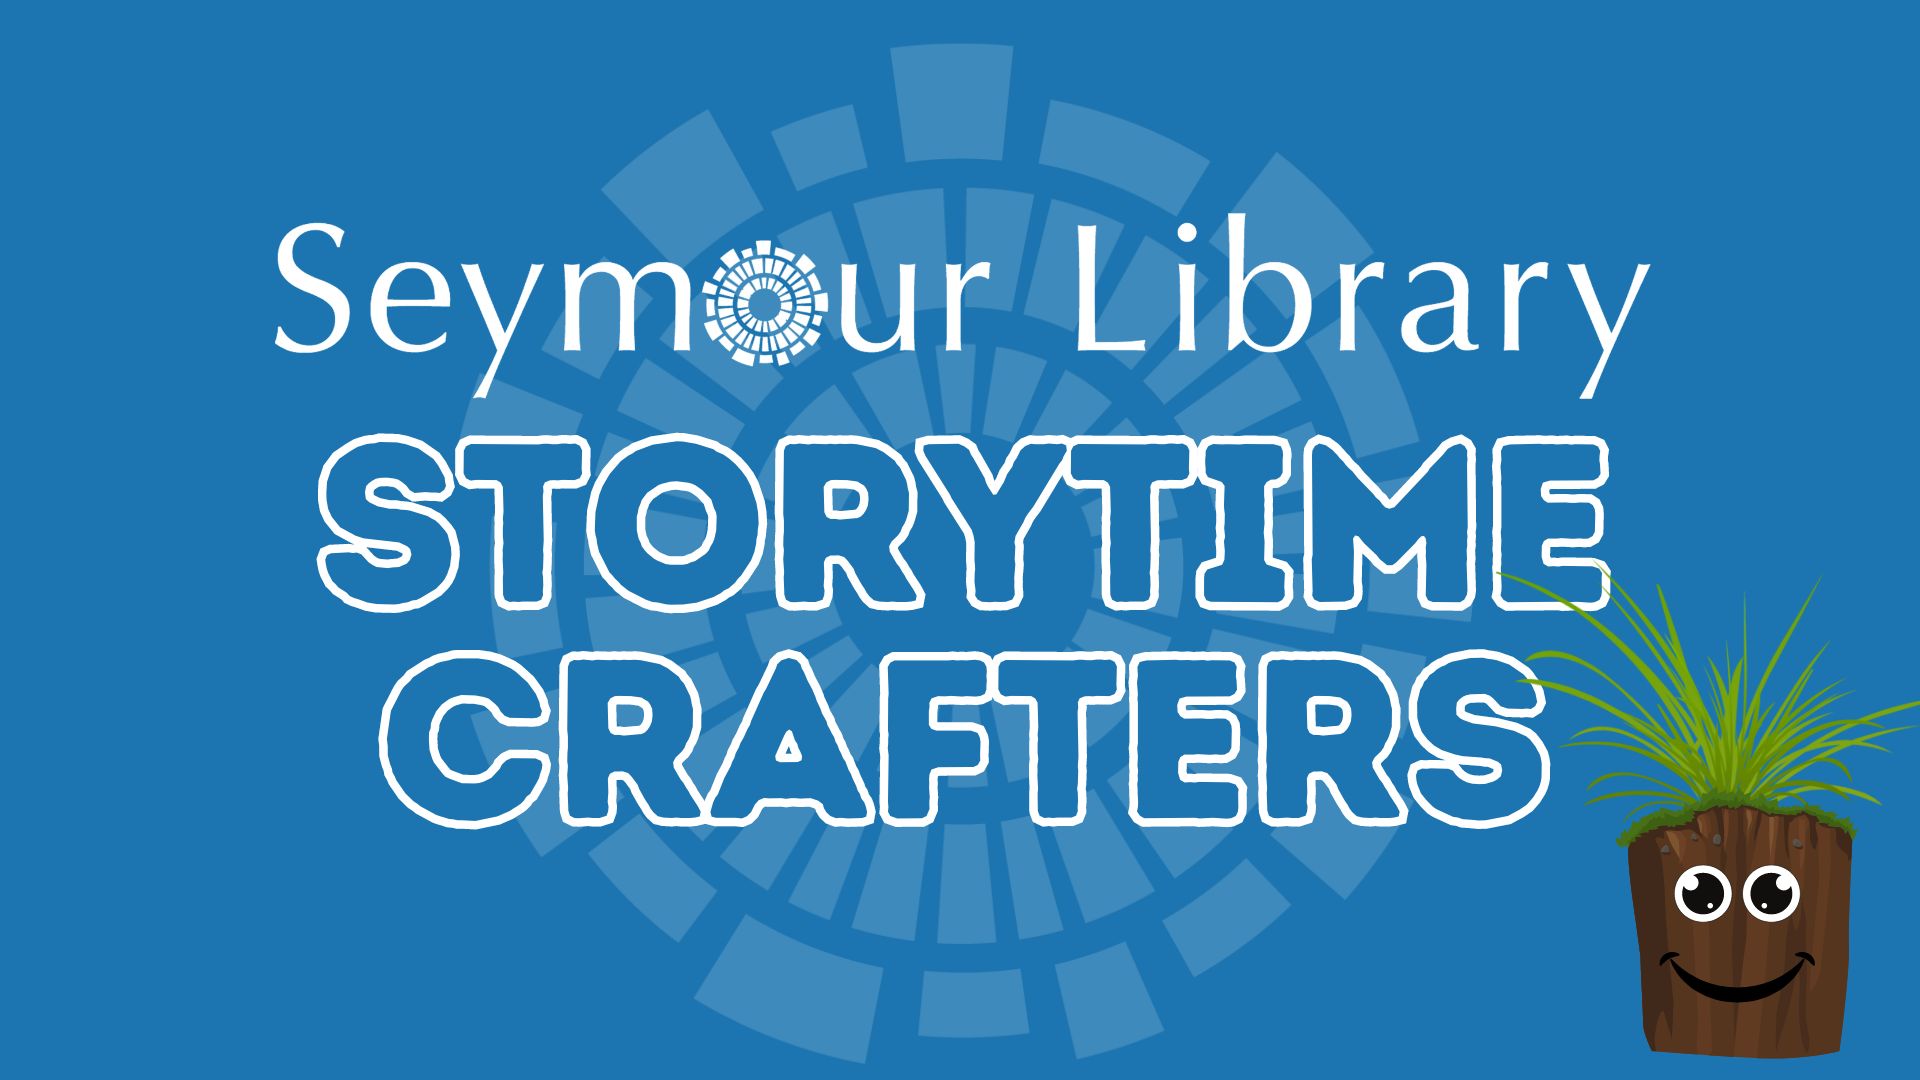 Seymour Library Storytime Crafters - logo and cartoon of grass buddy.